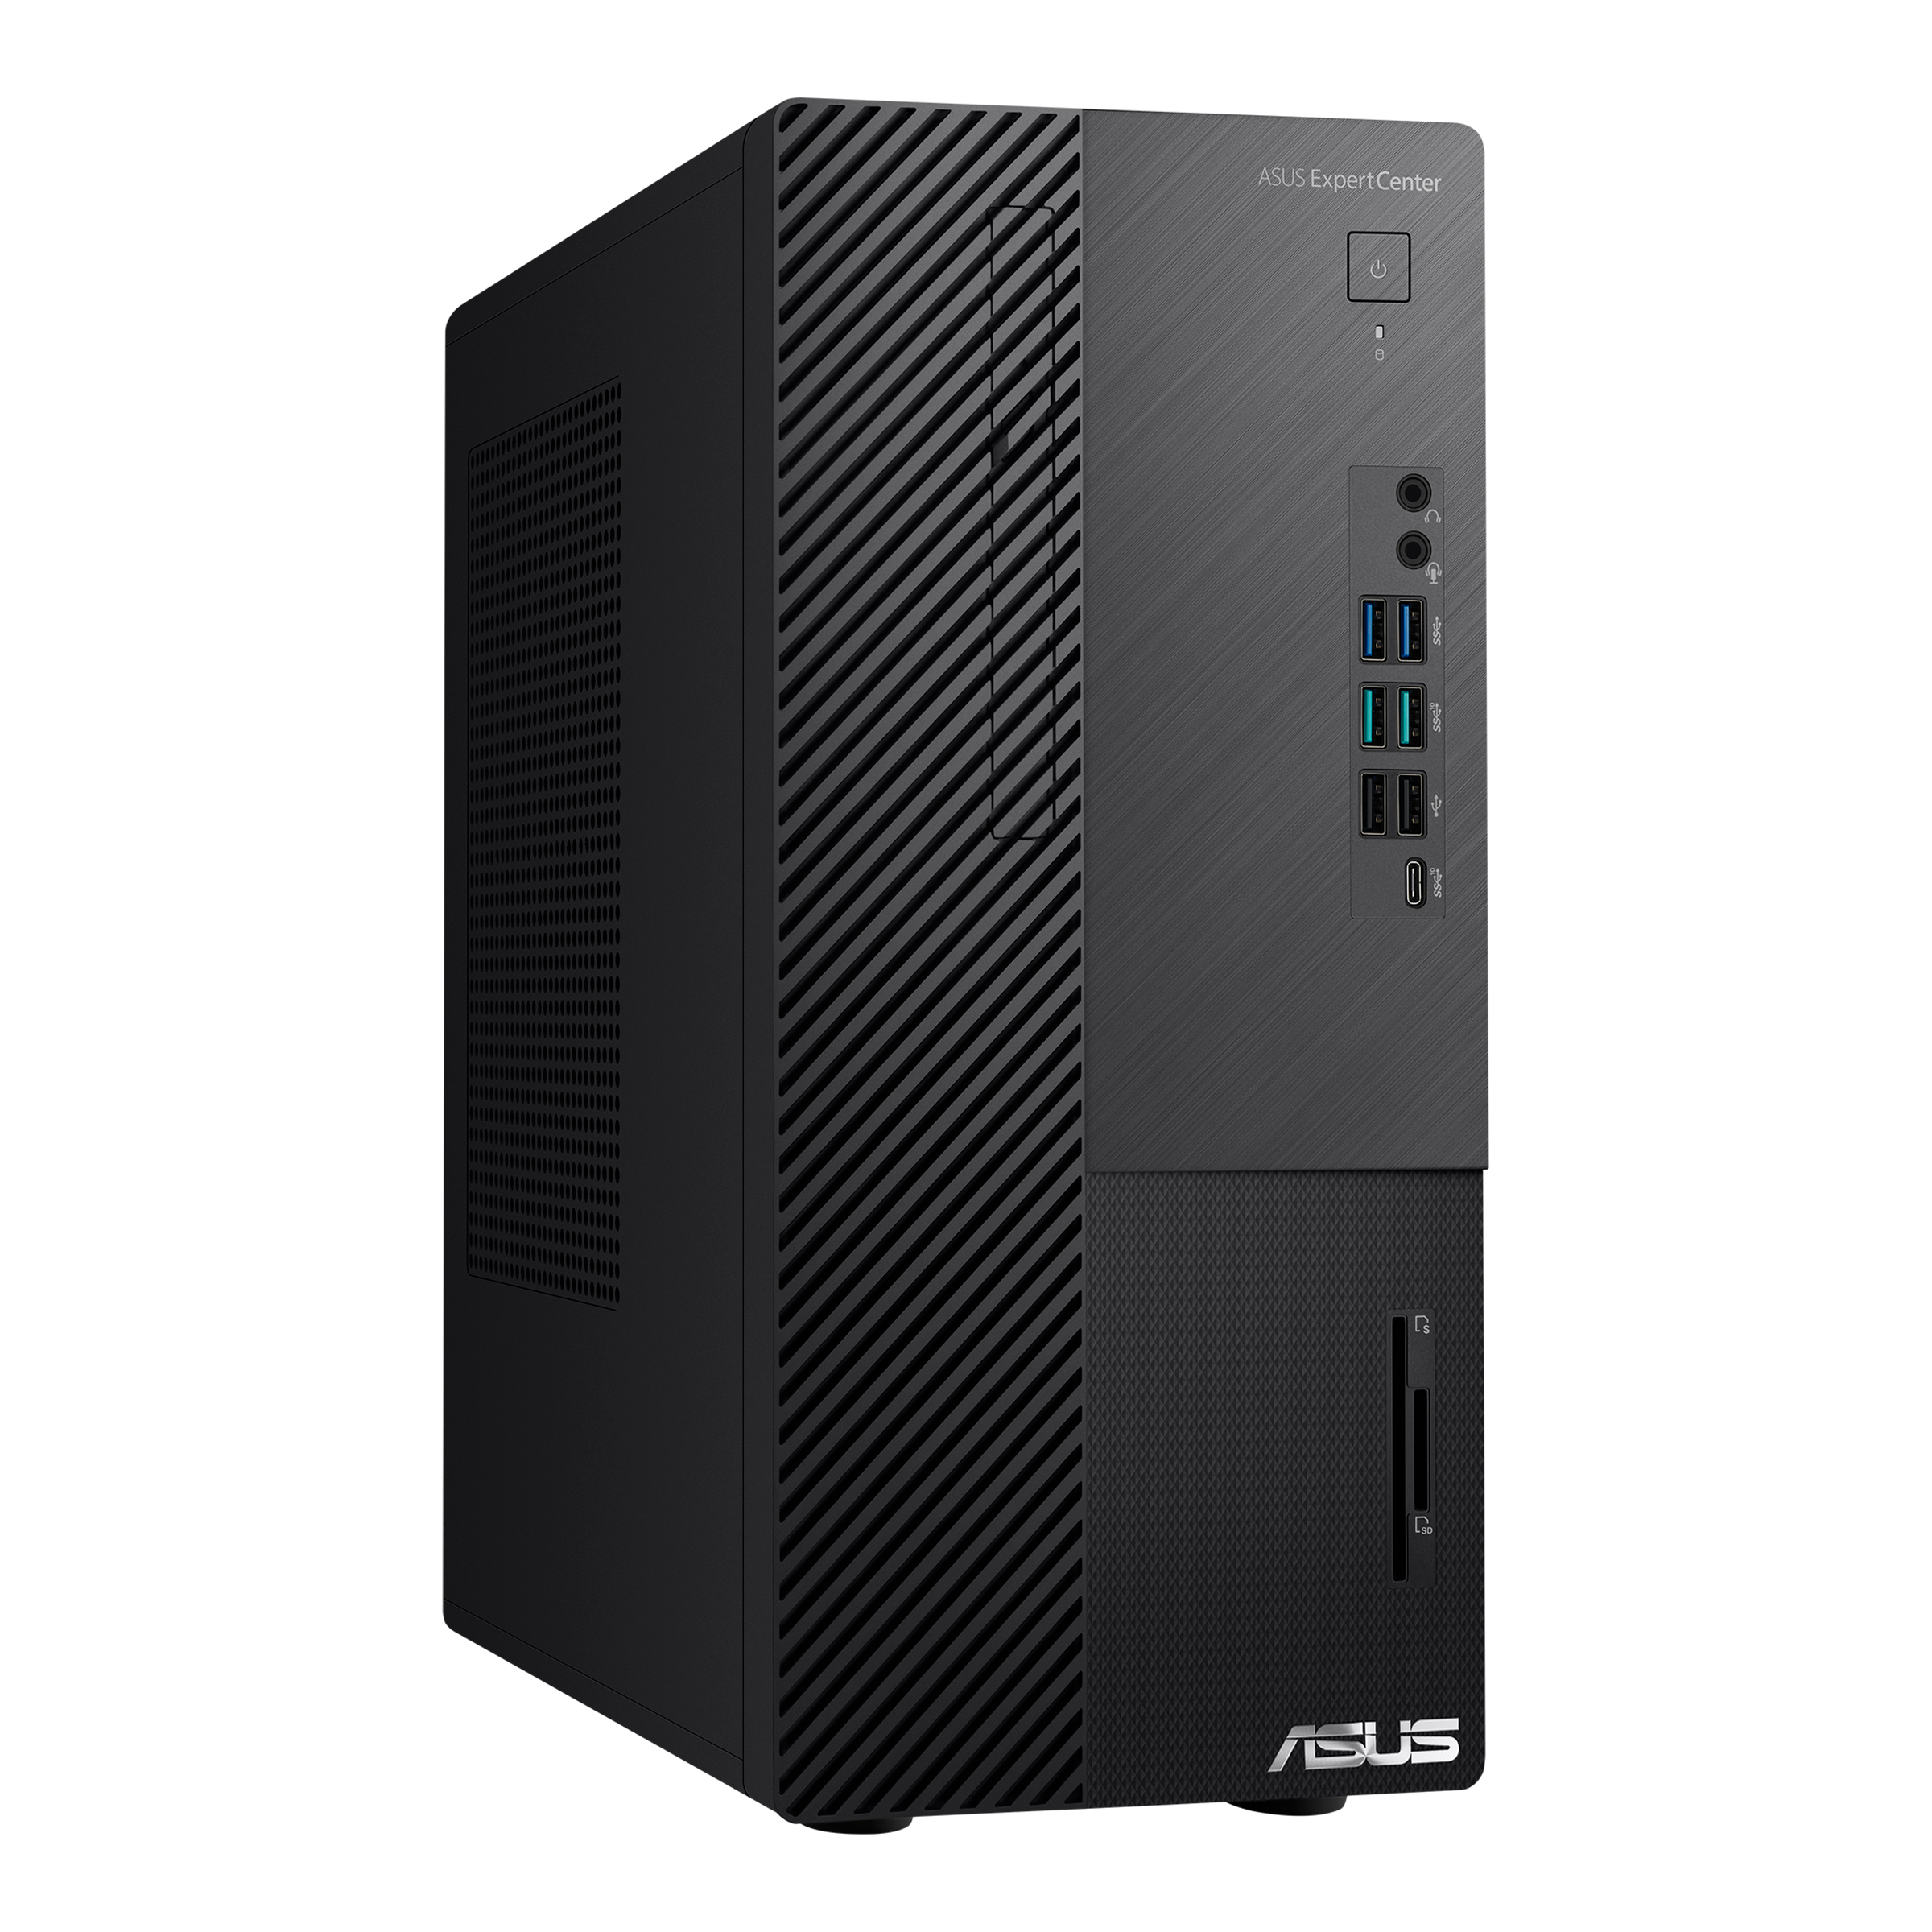 ASUS ExpertCenter D7 Mini Tower D700MD_up to 12th Gen Intel® i7 processor